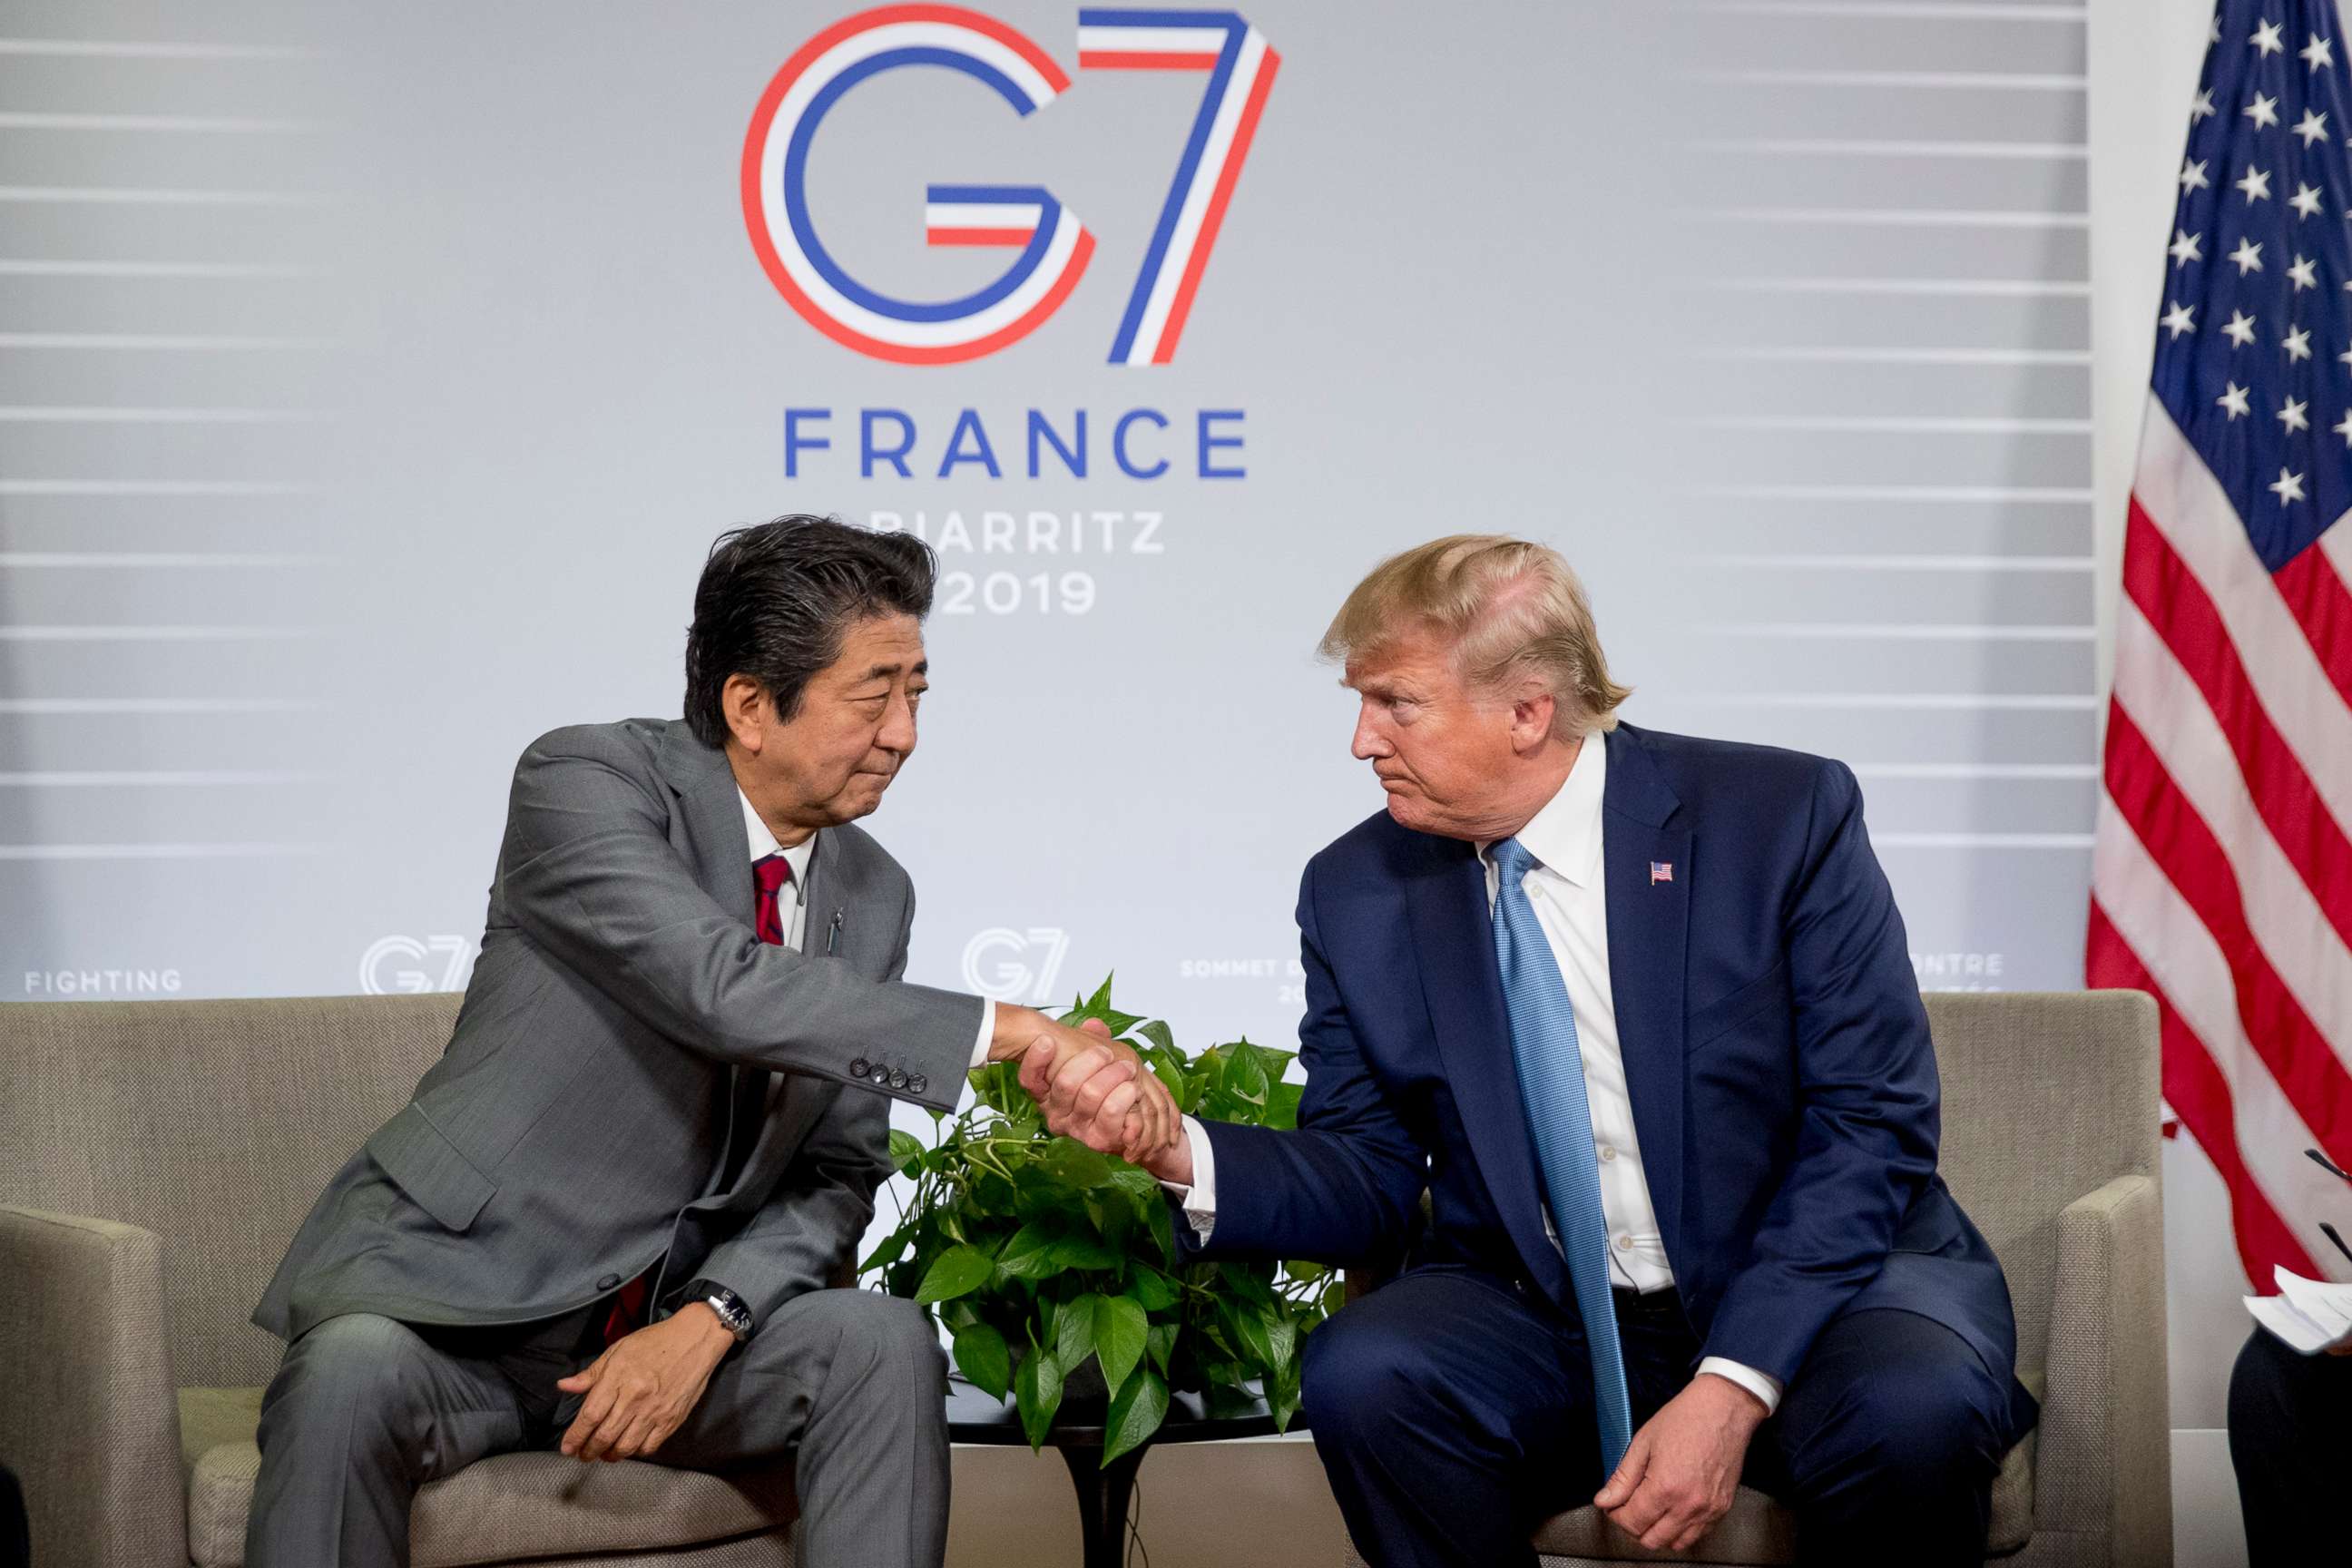 PHOTO:Japanese Prime Minister Shinzo Abe and President Donald Trump shake hands during a news conference at the G-7 summit in Biarritz, France, Aug. 25, 2019.